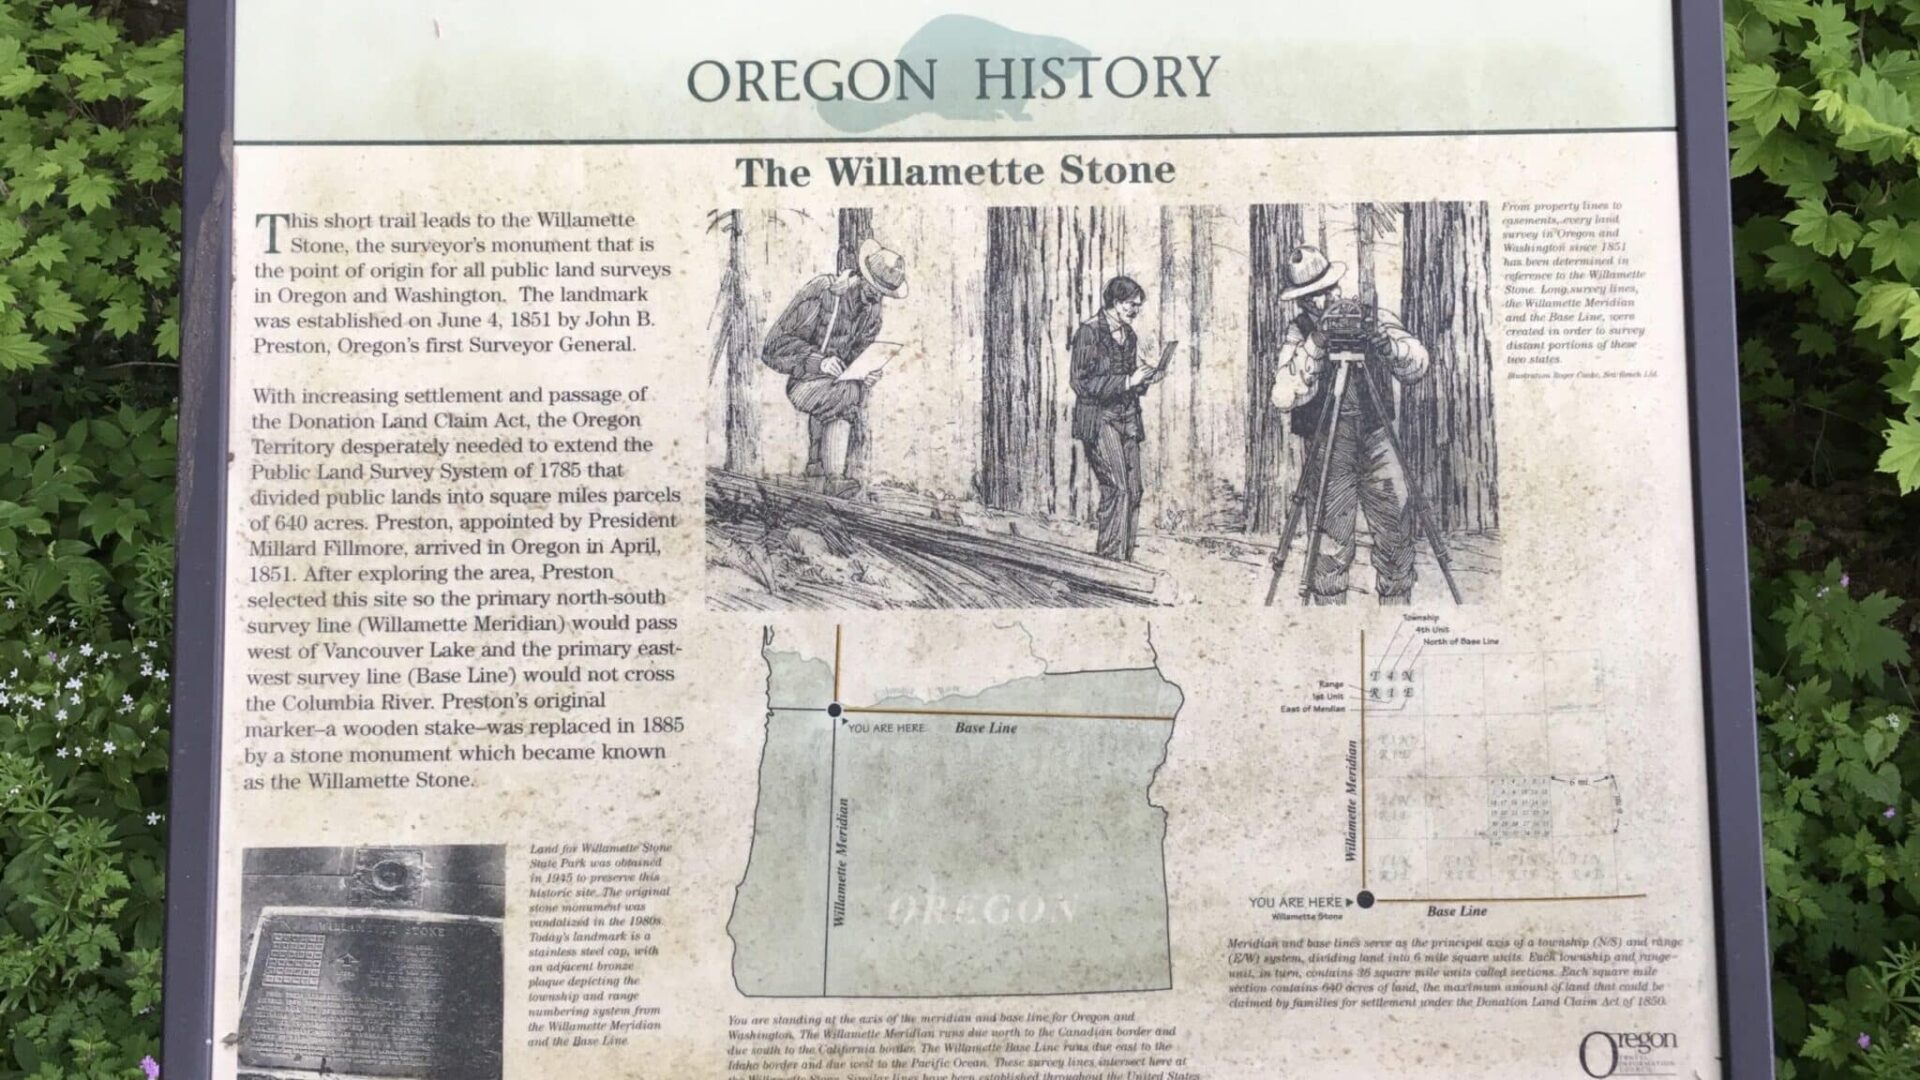 The Willamette Stone State Heritage Site informational sign